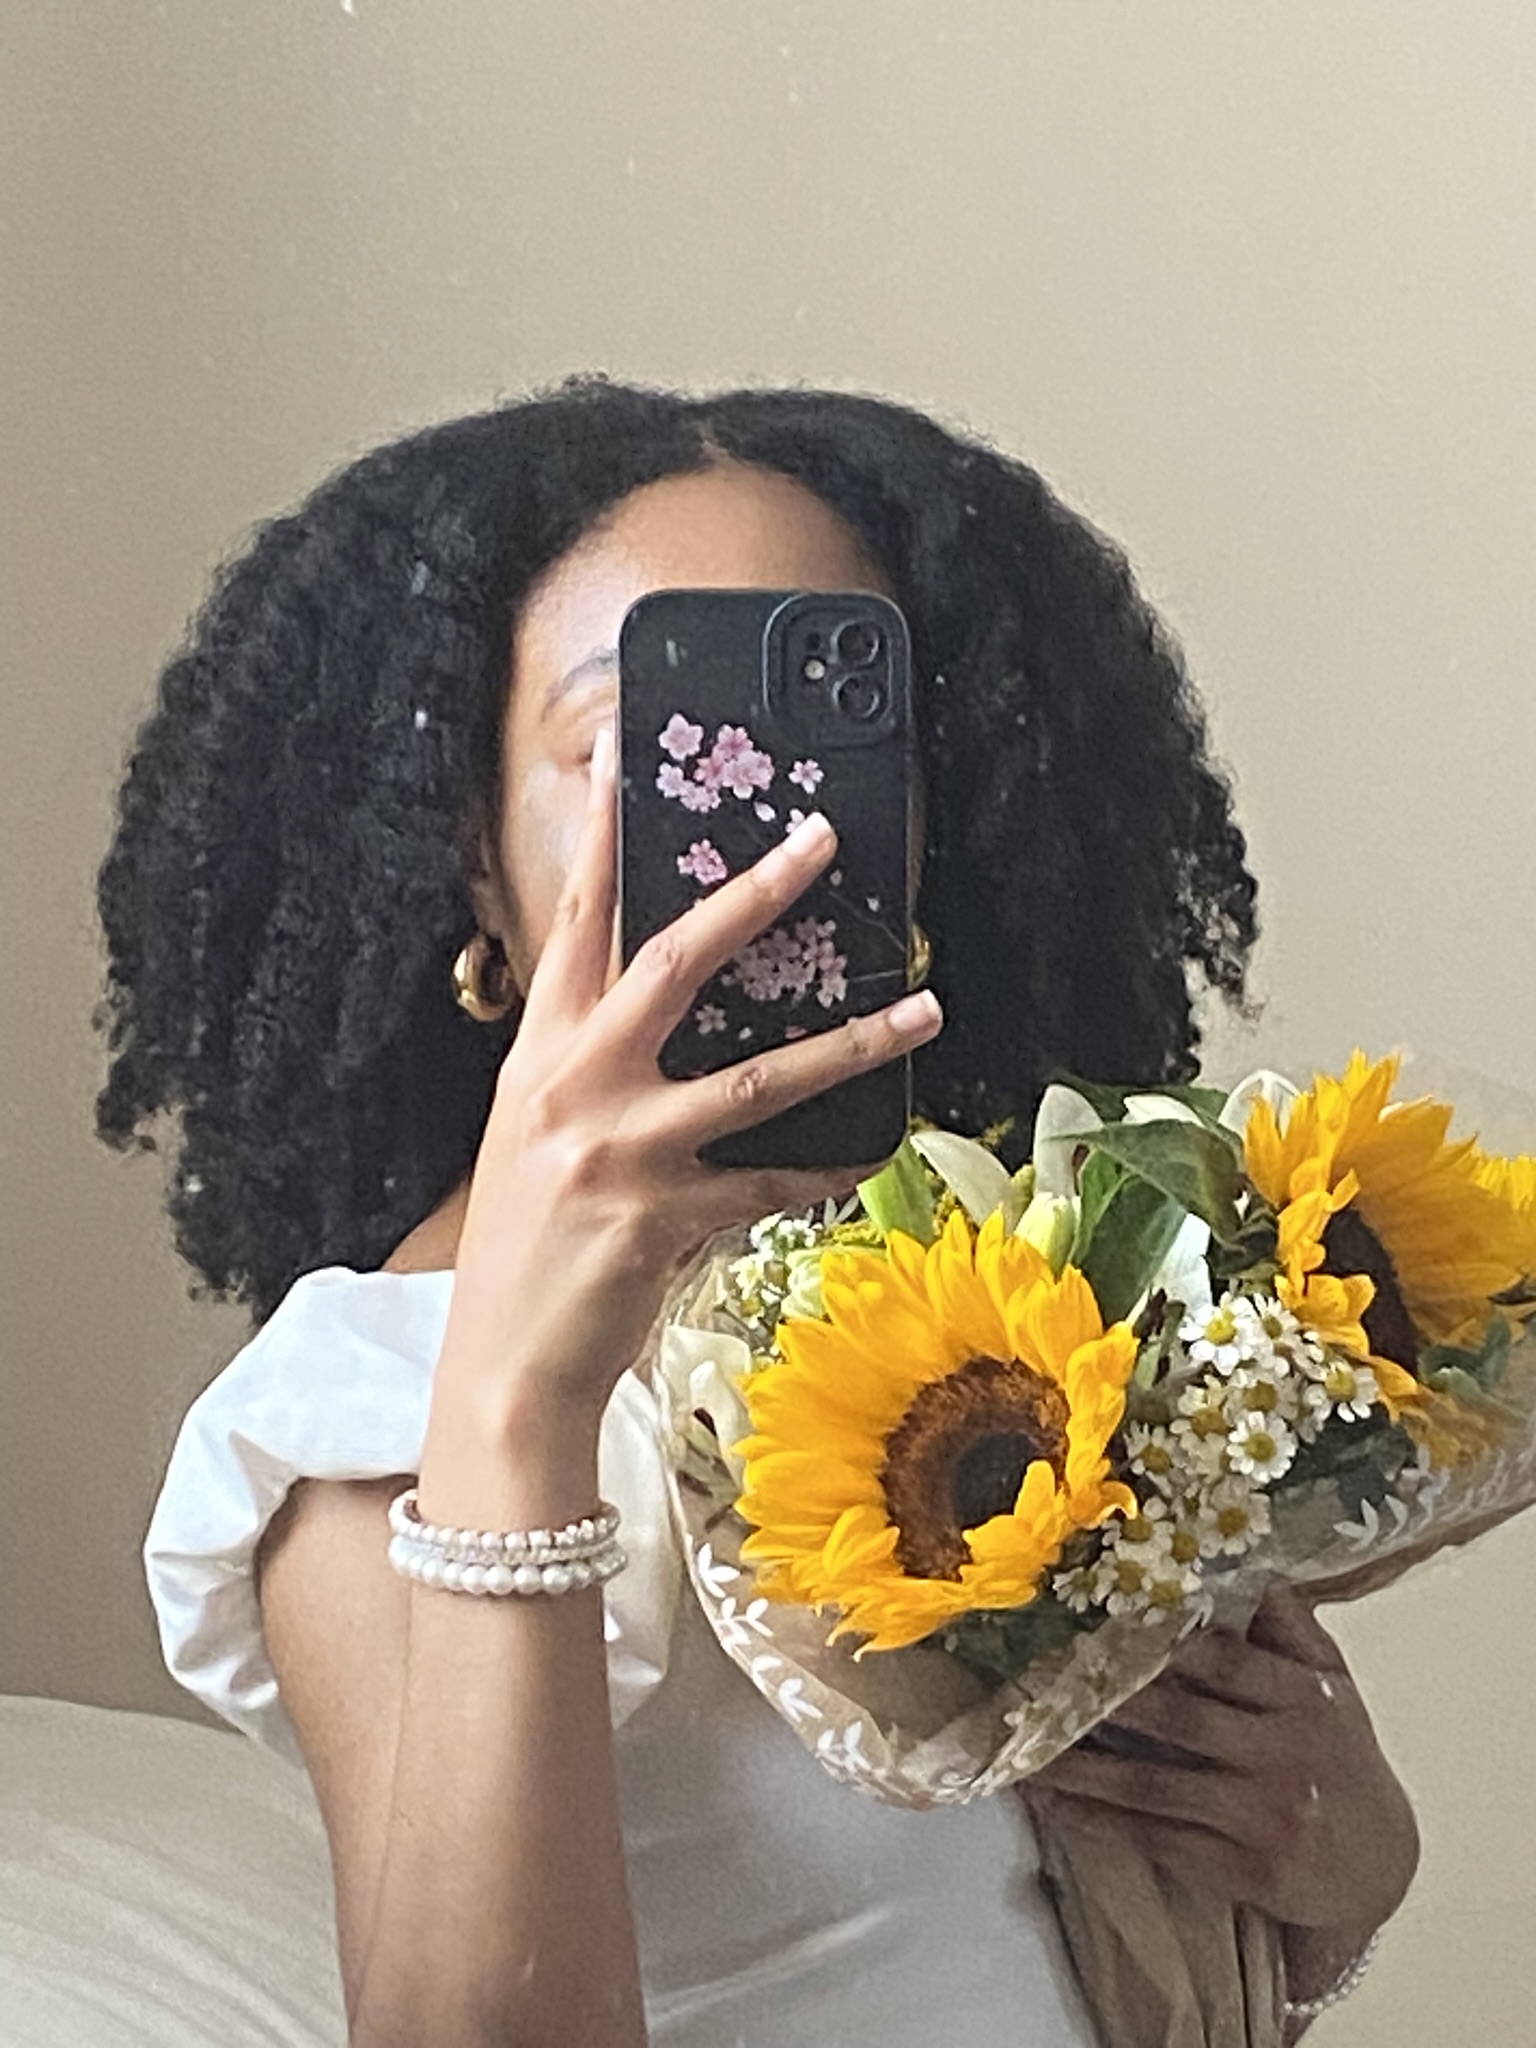 5 ways to heal your inner hair trauma to love and embrace your type 4 natural hair